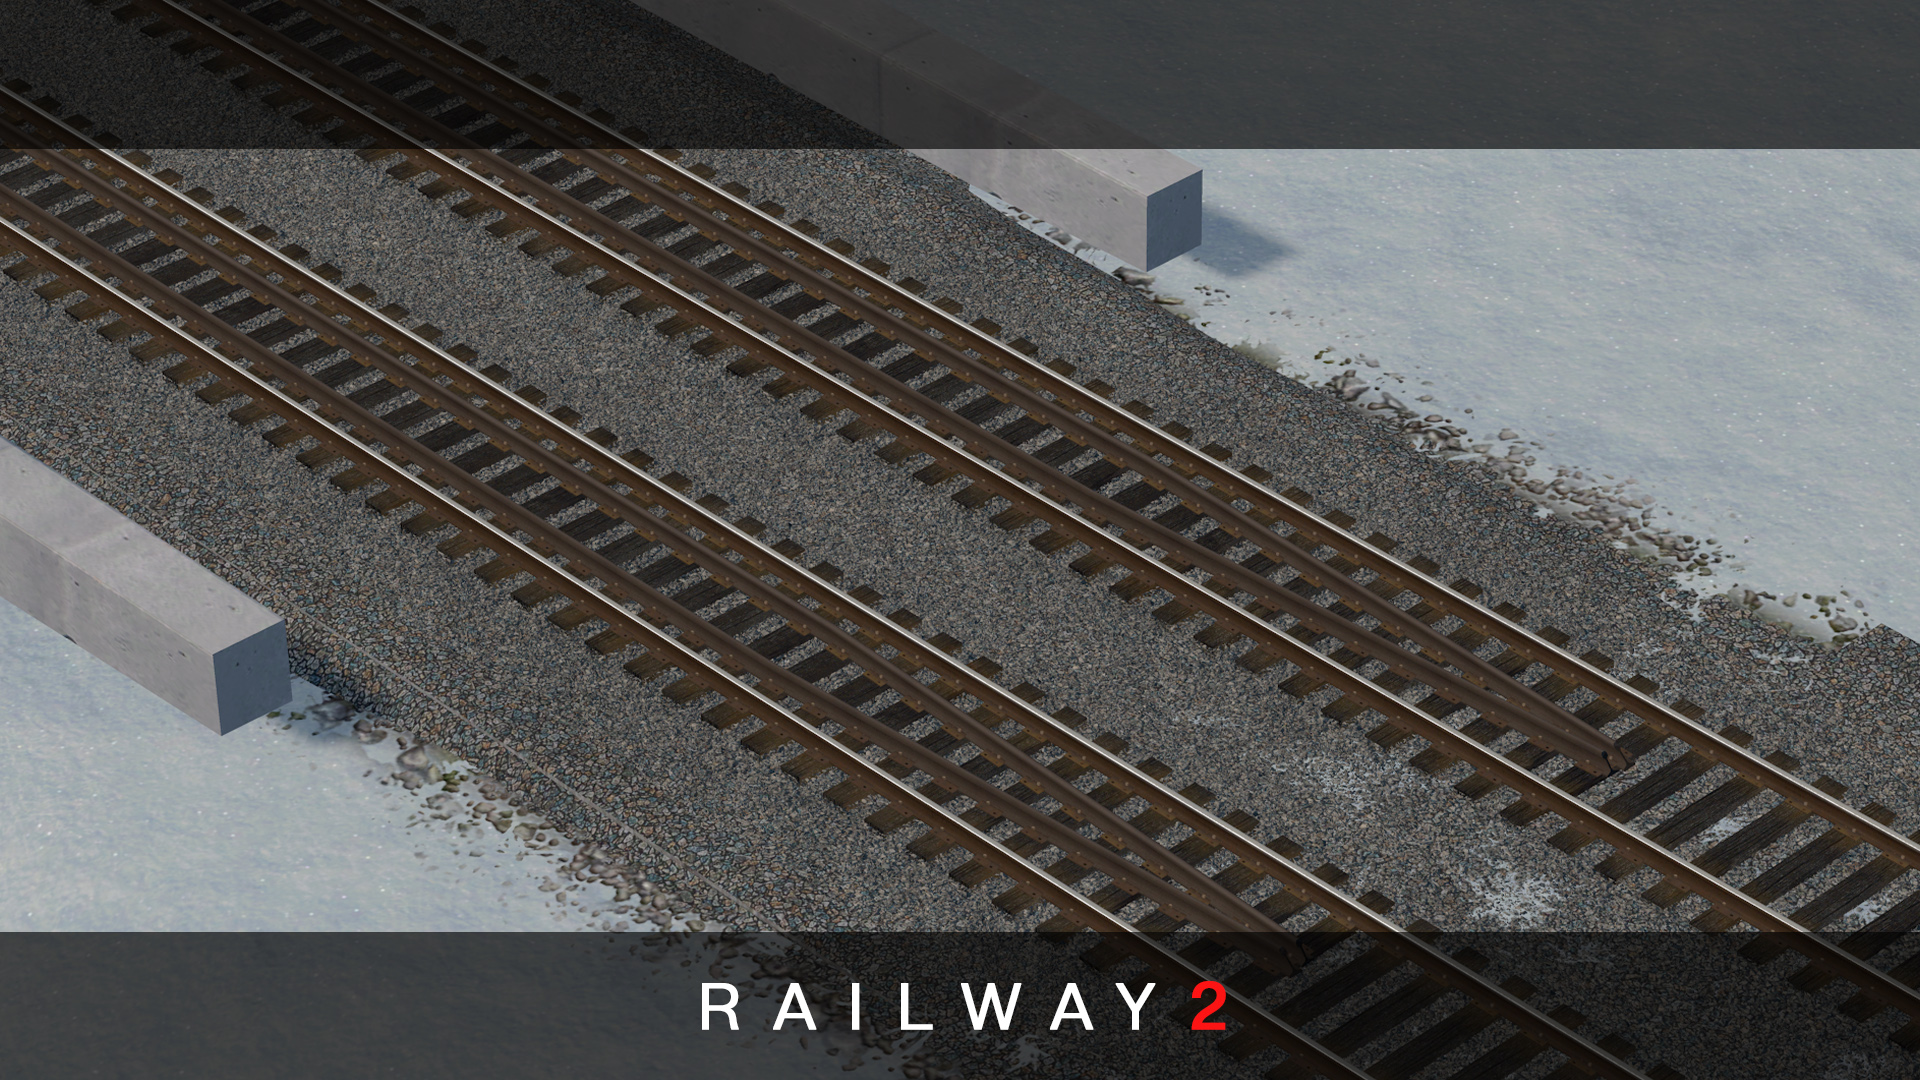 Cities: Skylines List of Railway 2 + Features + Modding Tutorial Information - 4.1 Networks: Core Features - 81E9346